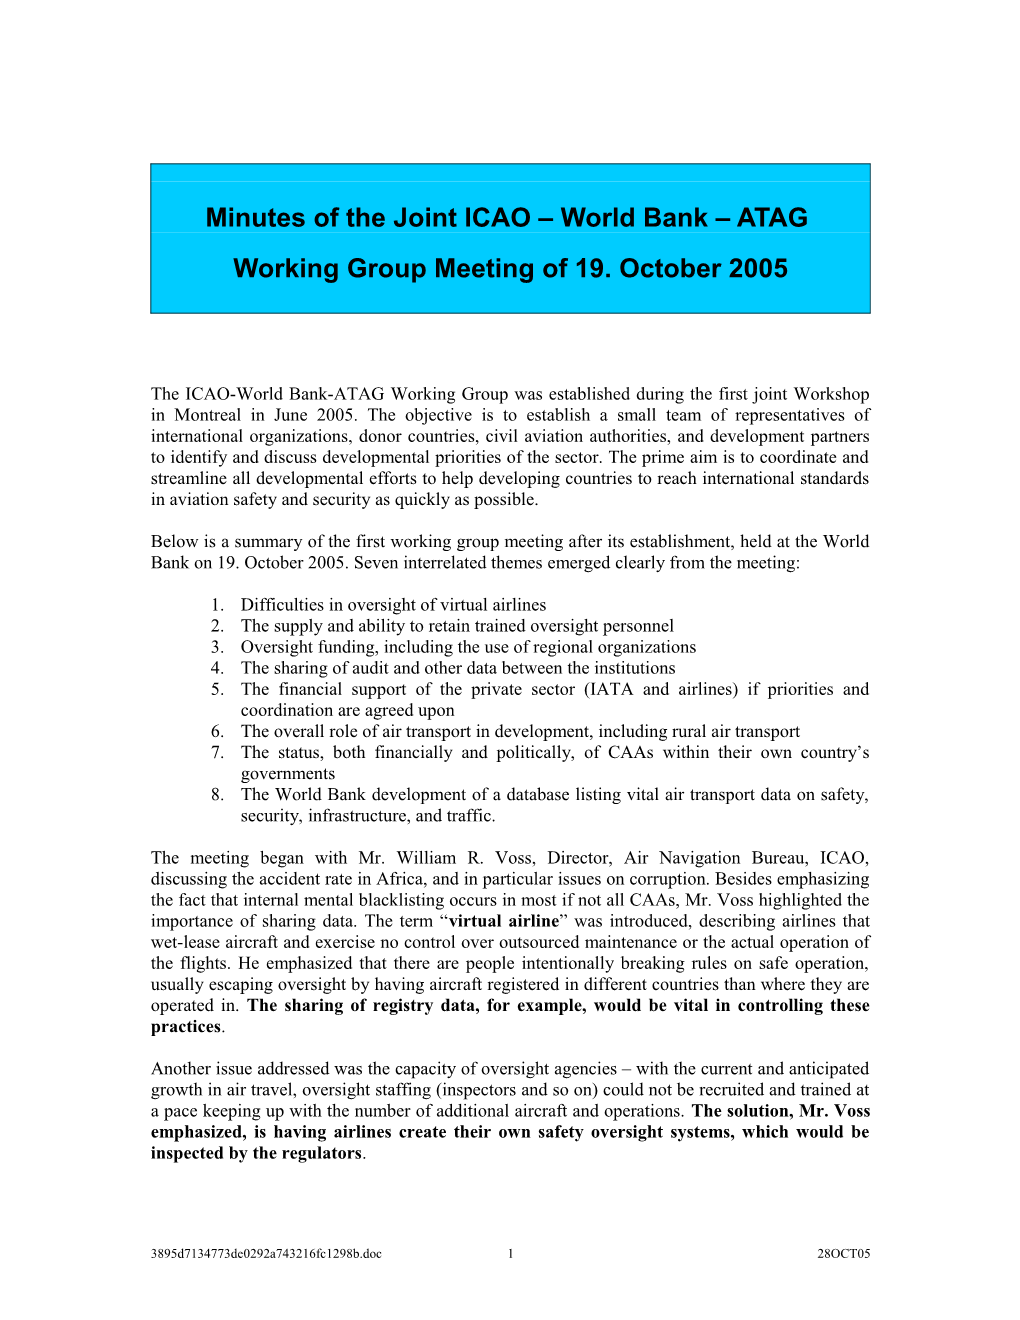 Notes on the Joint World Bank/ICAO/ATAG Working Group Meeting of 19